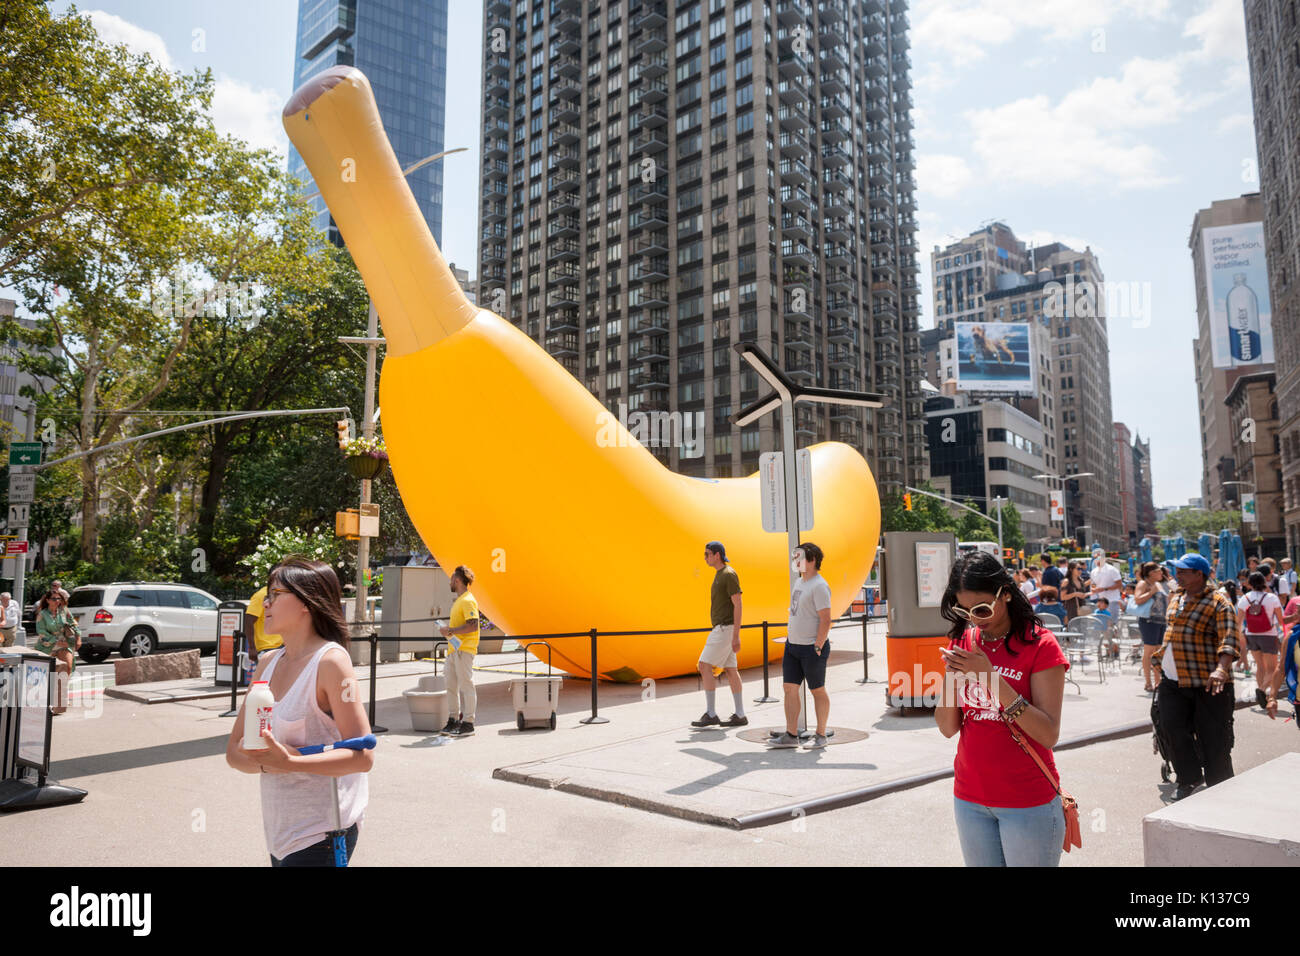 A giant inflatable banana stands in Flatiron Plaza in New York on Sunday, August 20, 2017 as part of the Chiquita "Banana Sun" branding event. Chiquita has claimed the banana shaped sliver of the sun caused by the eclipse and re-named it the "Banana Sun", also claiming that they are responsible for the eclipse. The tongue-in-cheek branding event also featured free eclipse watching glasses to passer-by. (© Richard B. Levine) Stock Photo